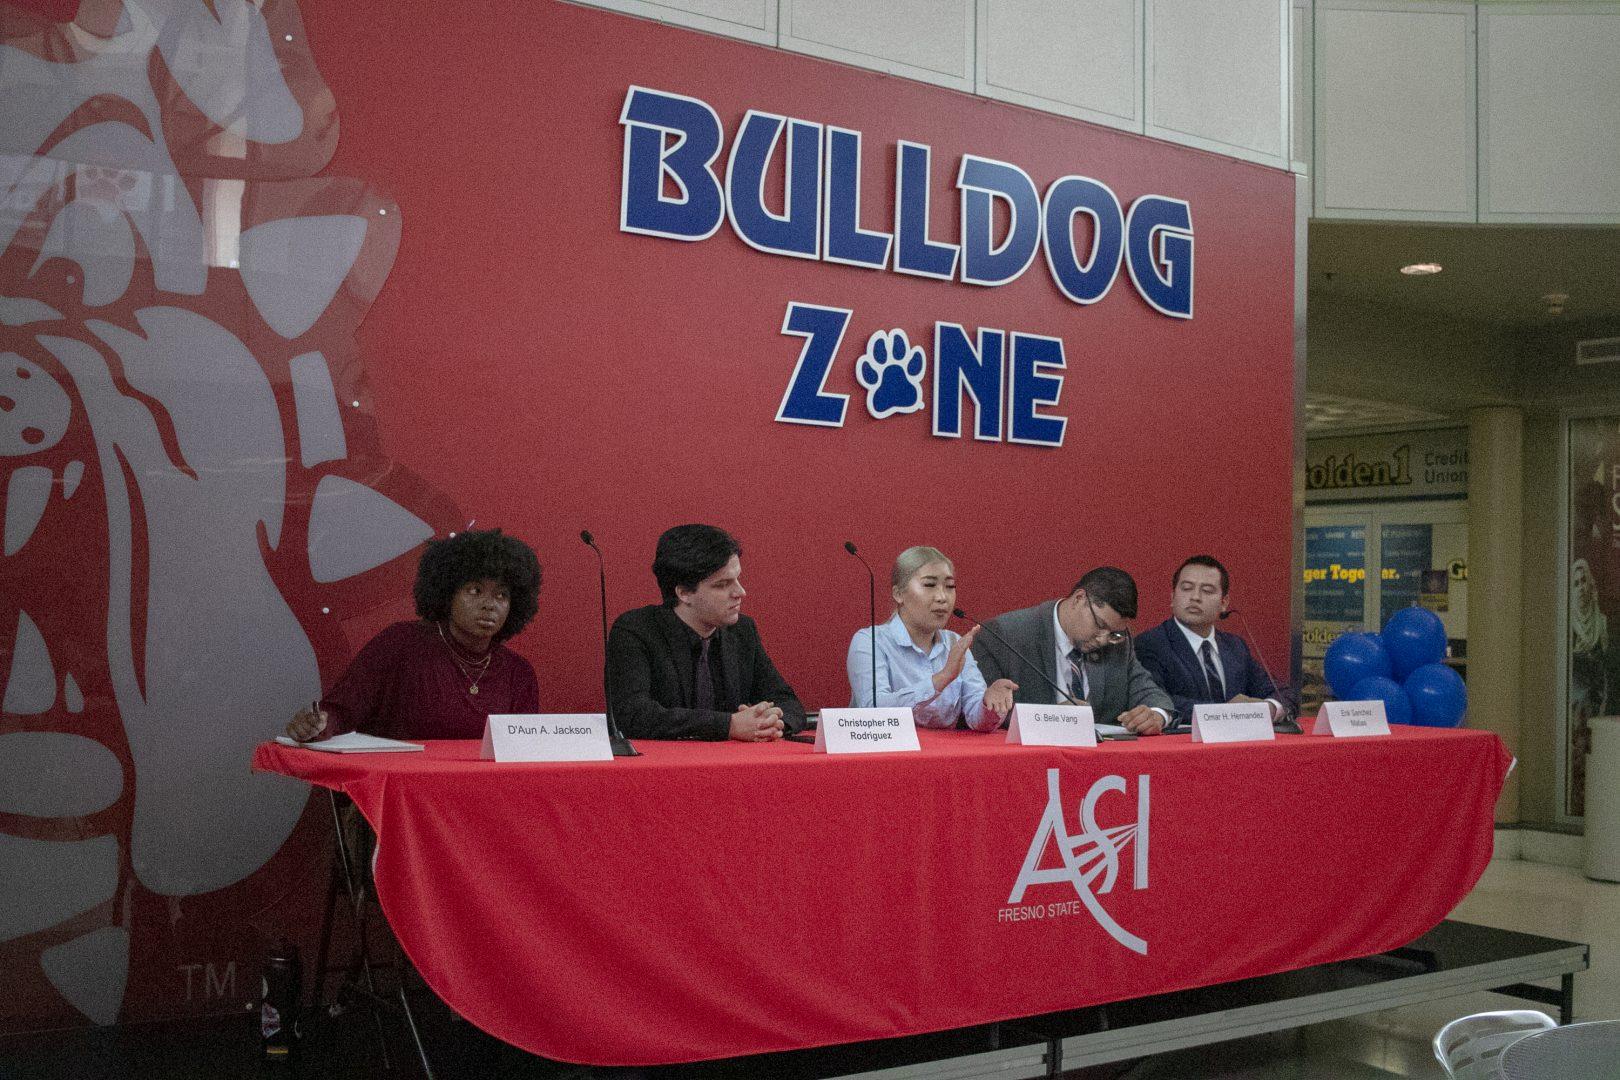 Candidates for the ASI presidency sit on a panel during the presidential debate in the University Student Union on April 5.